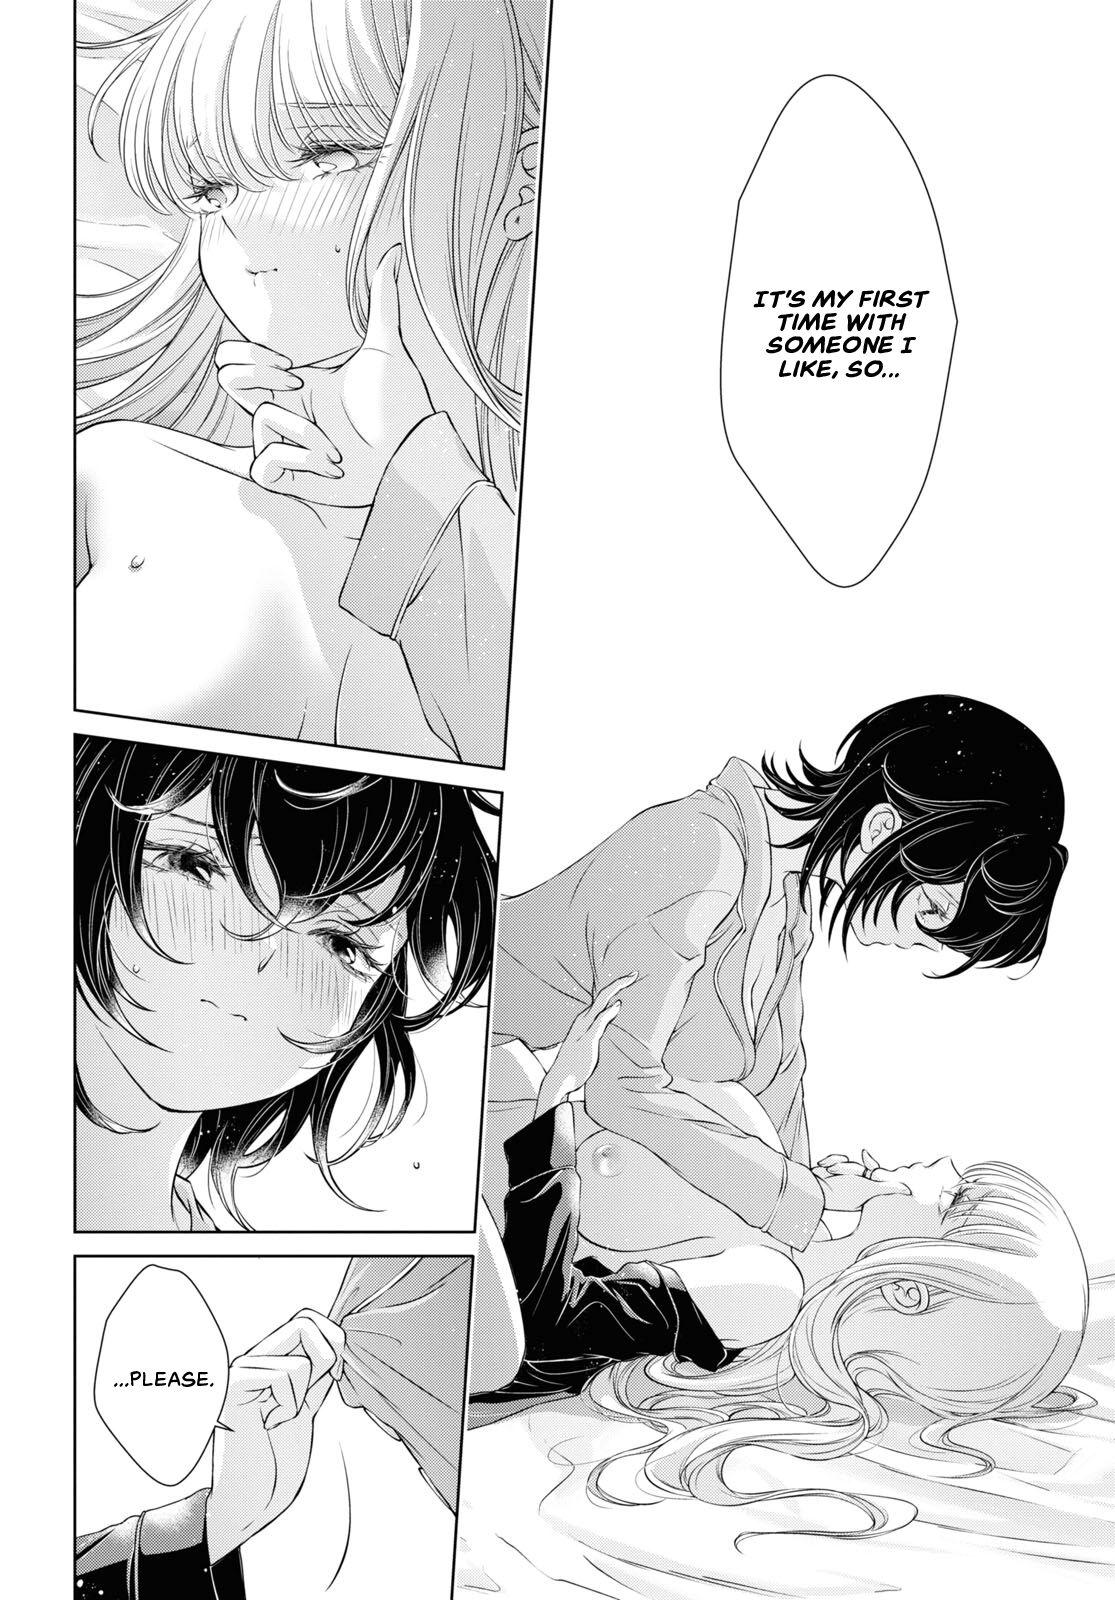 My Girlfriend's Not Here Today Ch. 7-11 + Twitter extras 129